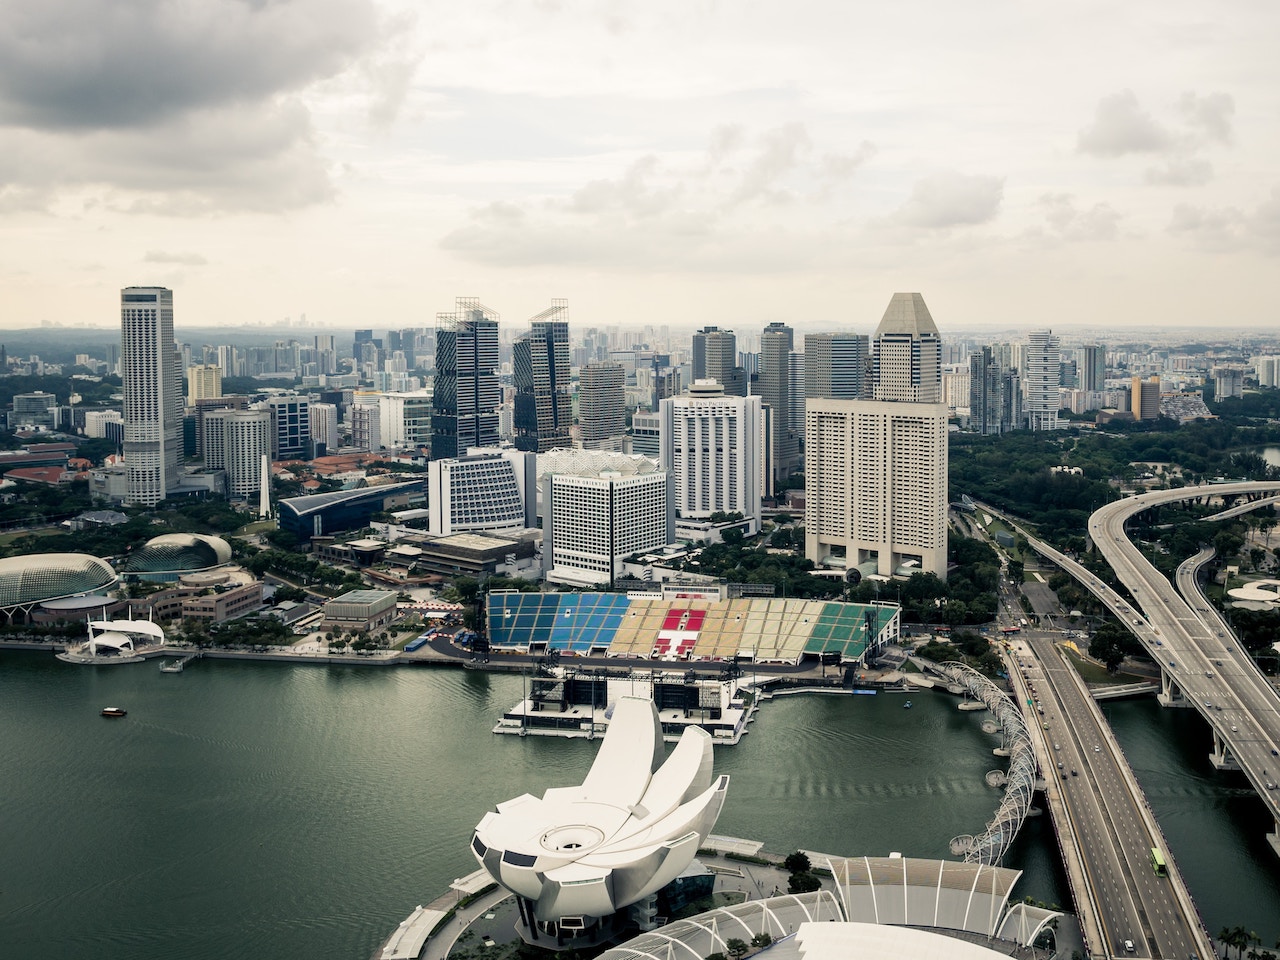 Birds eye view of Singapore's financial industrial district